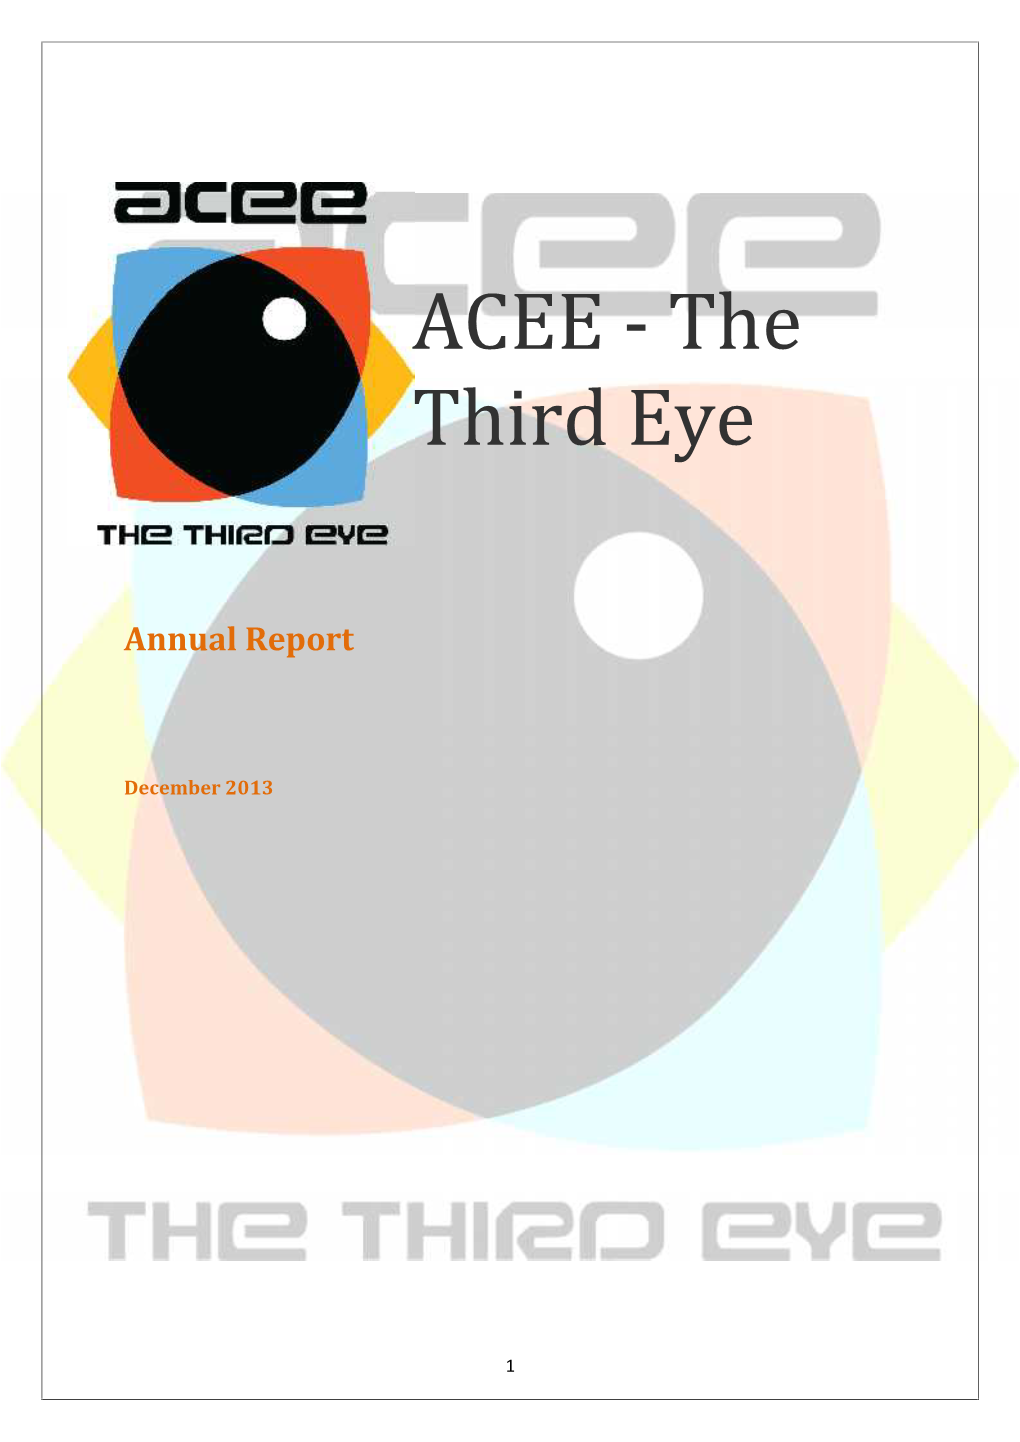 ACEE the Third